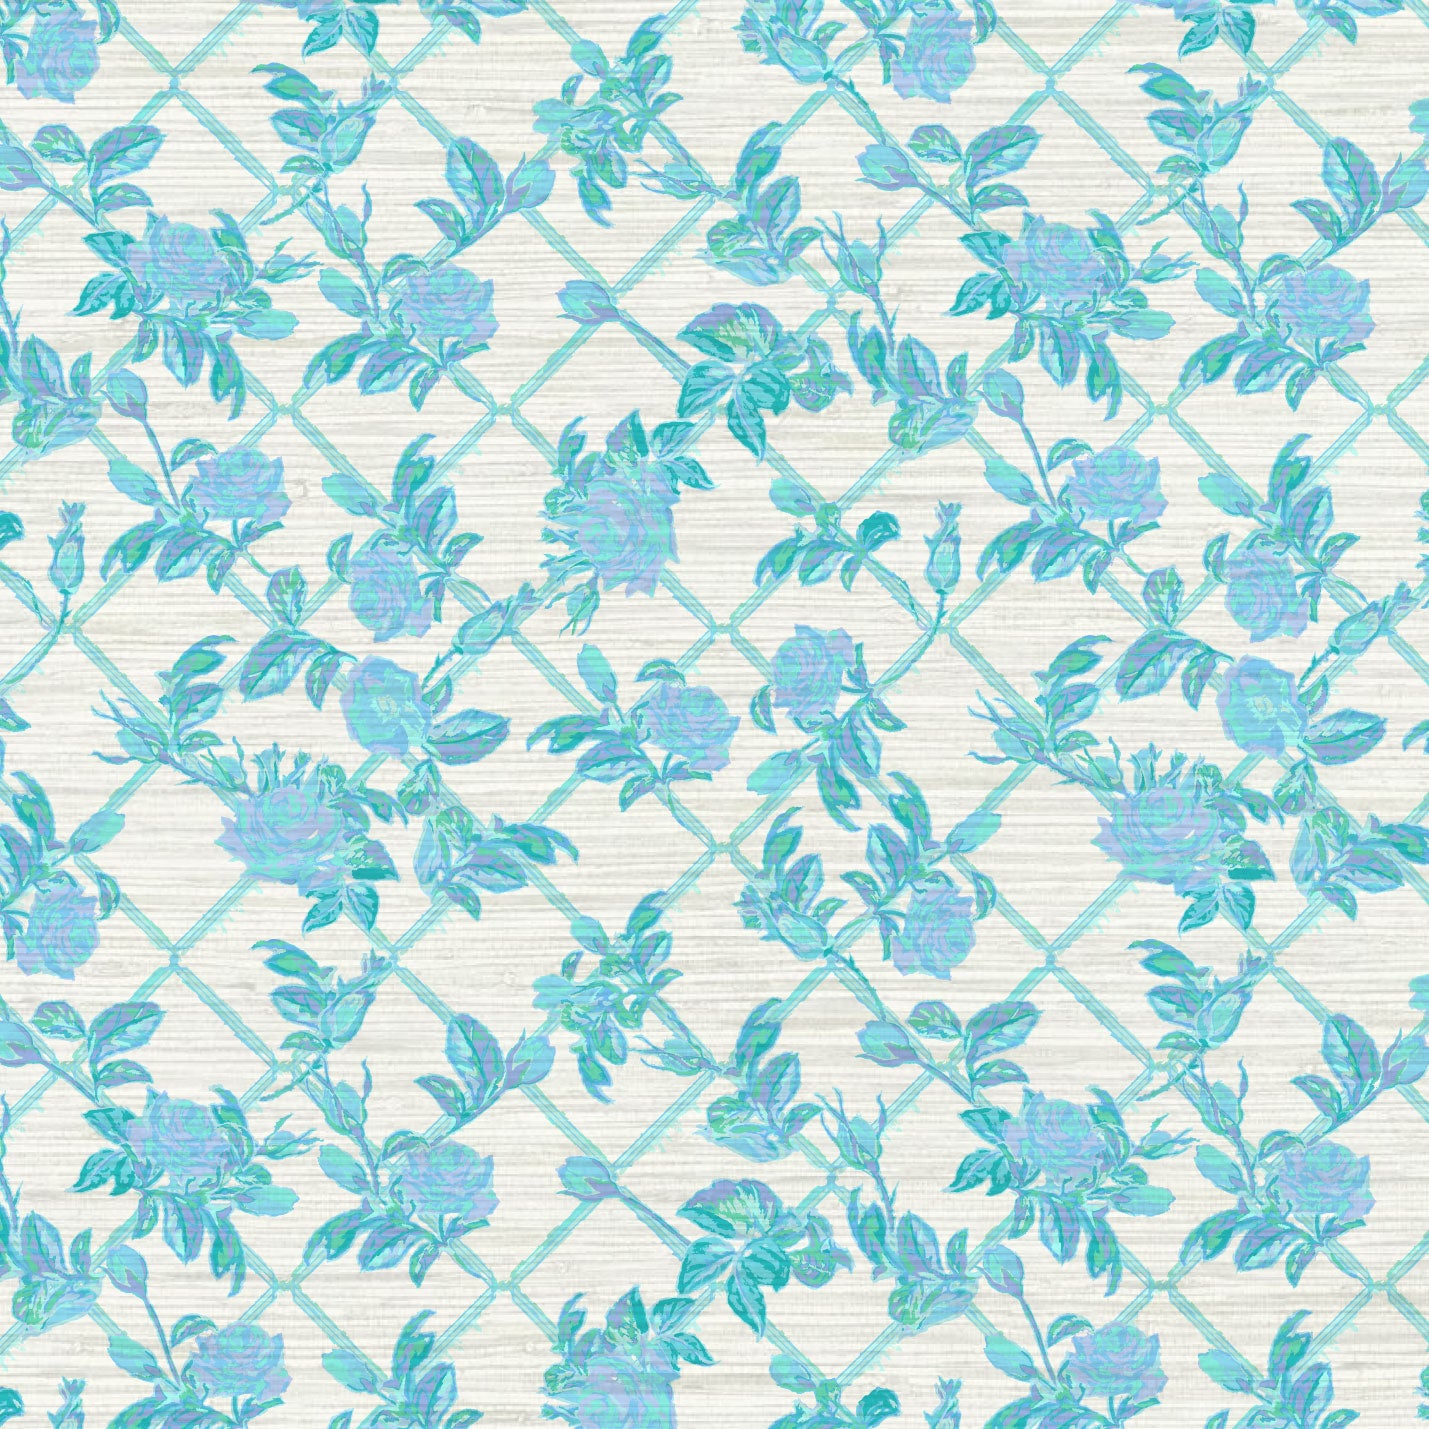 Grasscloth wallpaper Natural Textured Eco-Friendly Non-toxic High-quality  Sustainable Interior Design Bold Custom Tailor-made Retro chic Grand millennial Maximalism  Traditional Dopamine decor garden grandma cottage core botanical rose floral flower rose bloom trellis stripe blue periwinkle girl feminine nursery